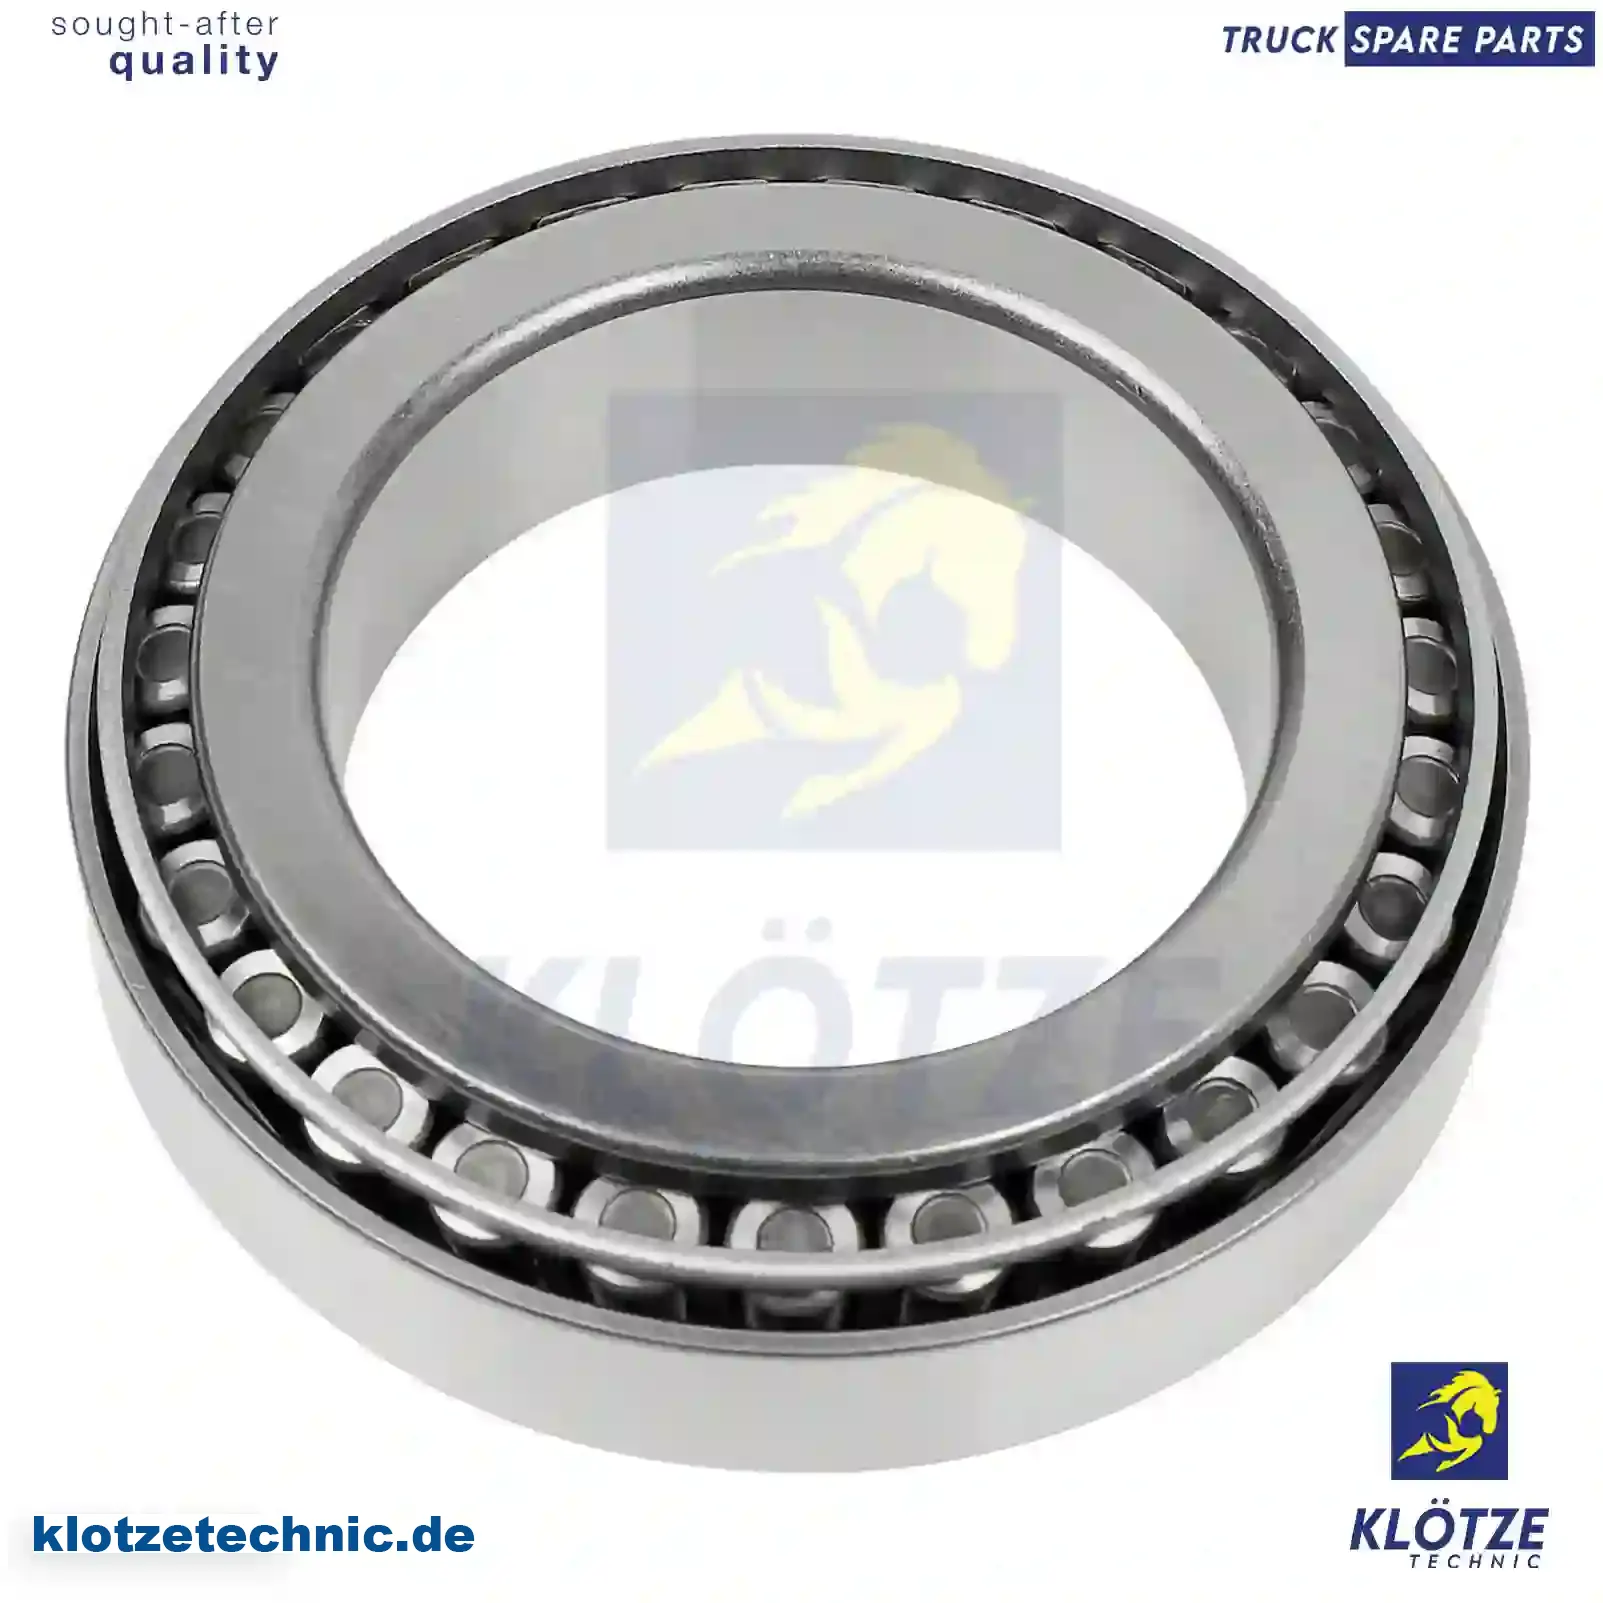 Tapered roller bearing, 0640618, 1400270, 640618, 000720032016, 0079819005, 0079819305, 0079819405